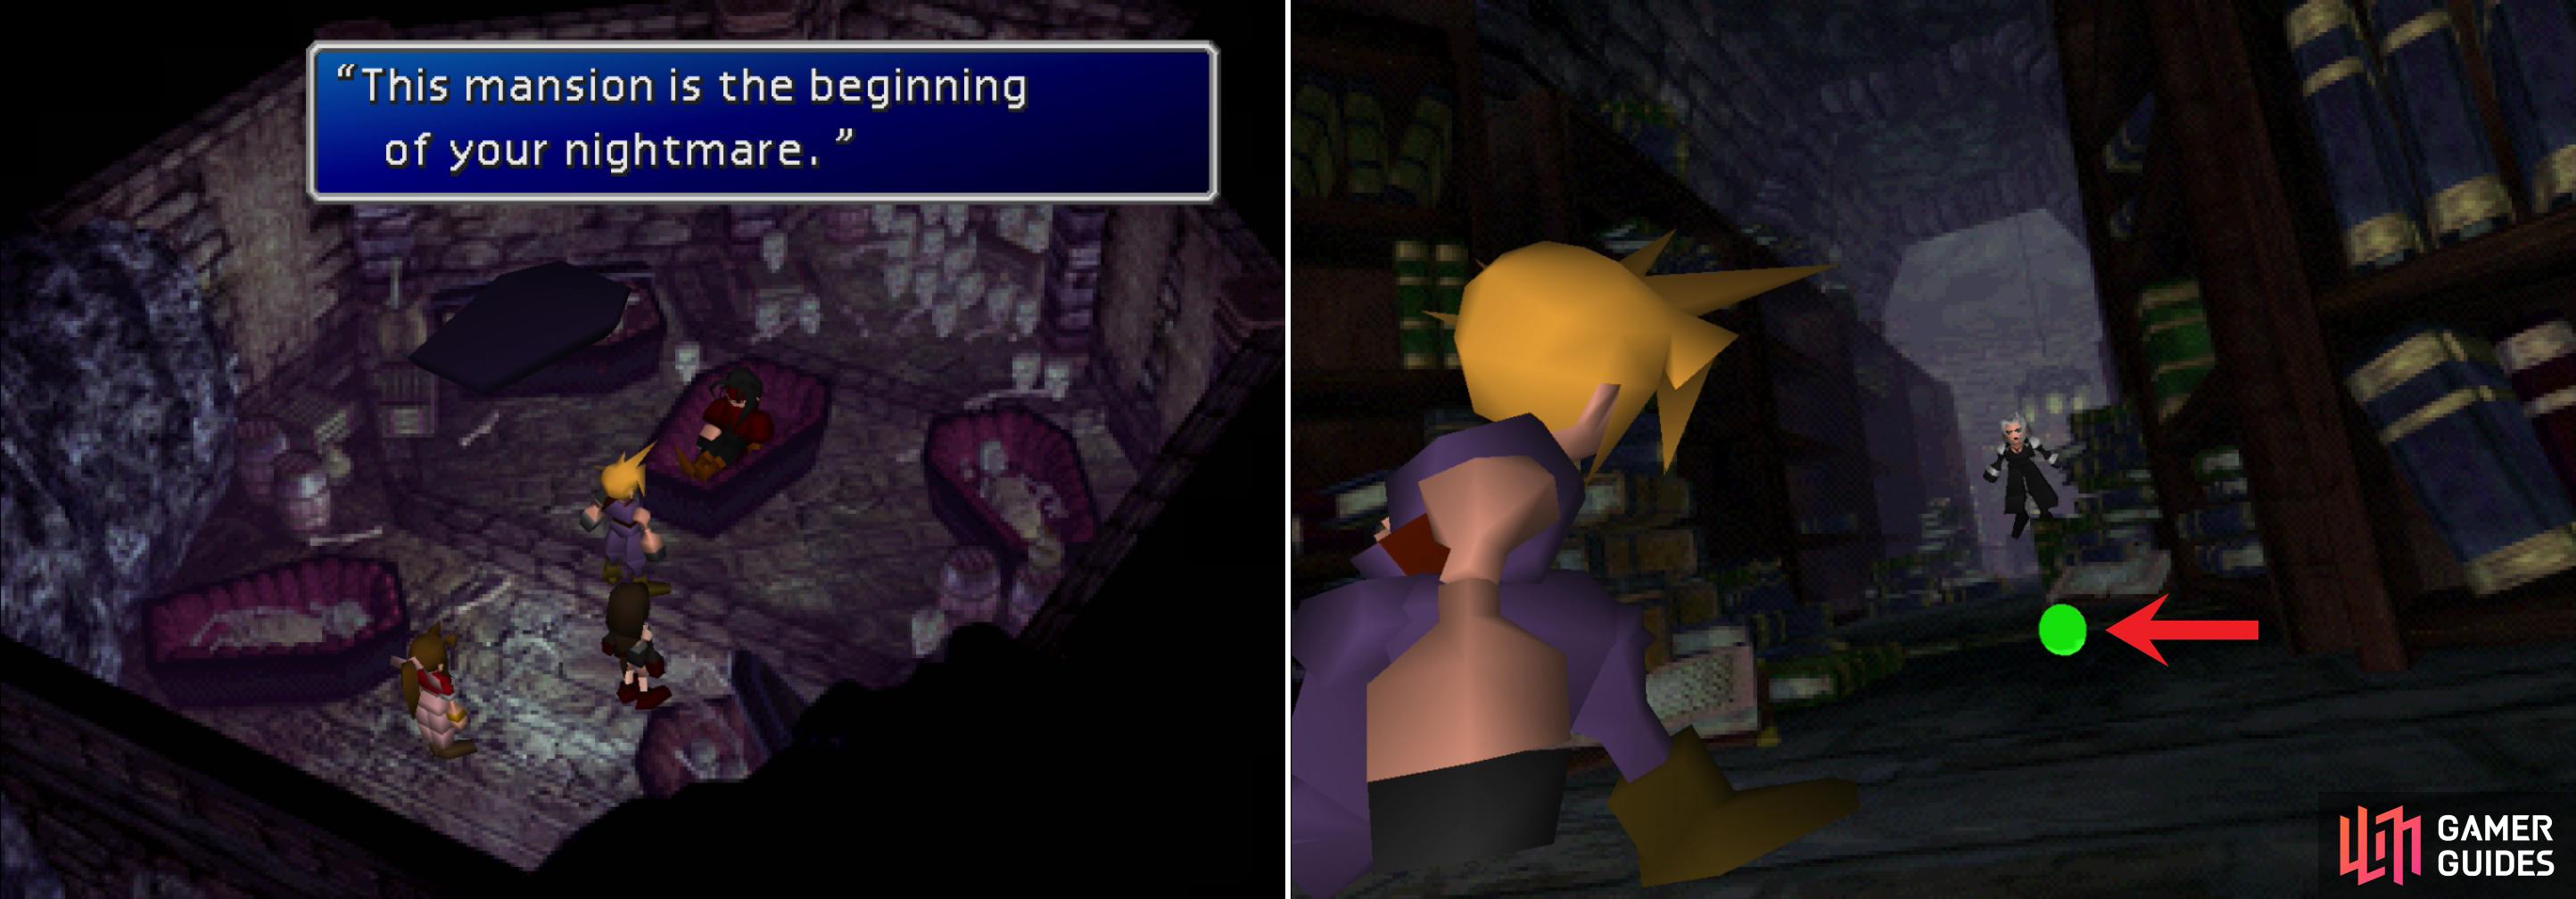 With the "Key to the Basement" in your hands, you can rouse a slumbering sinner in the bowels of the Shinra Mansion (left). If you continue into the offices you'll have a brief encounter with Sephiroth, who tosses you a piece of Destruct Materia (right).